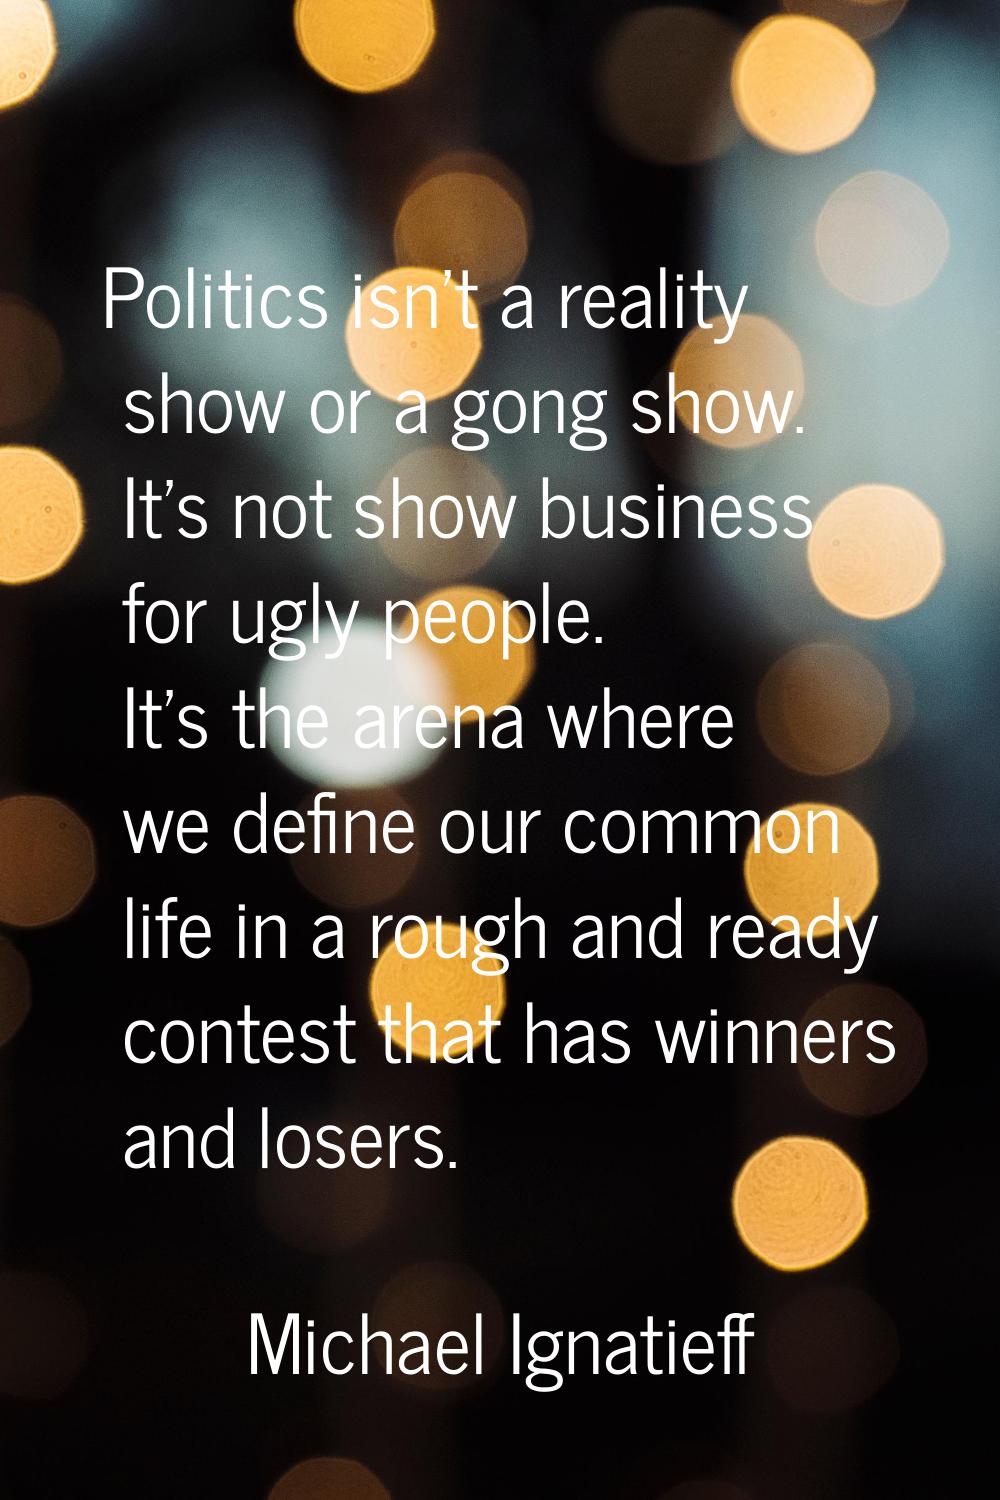 Politics isn't a reality show or a gong show. It's not show business for ugly people. It's the aren